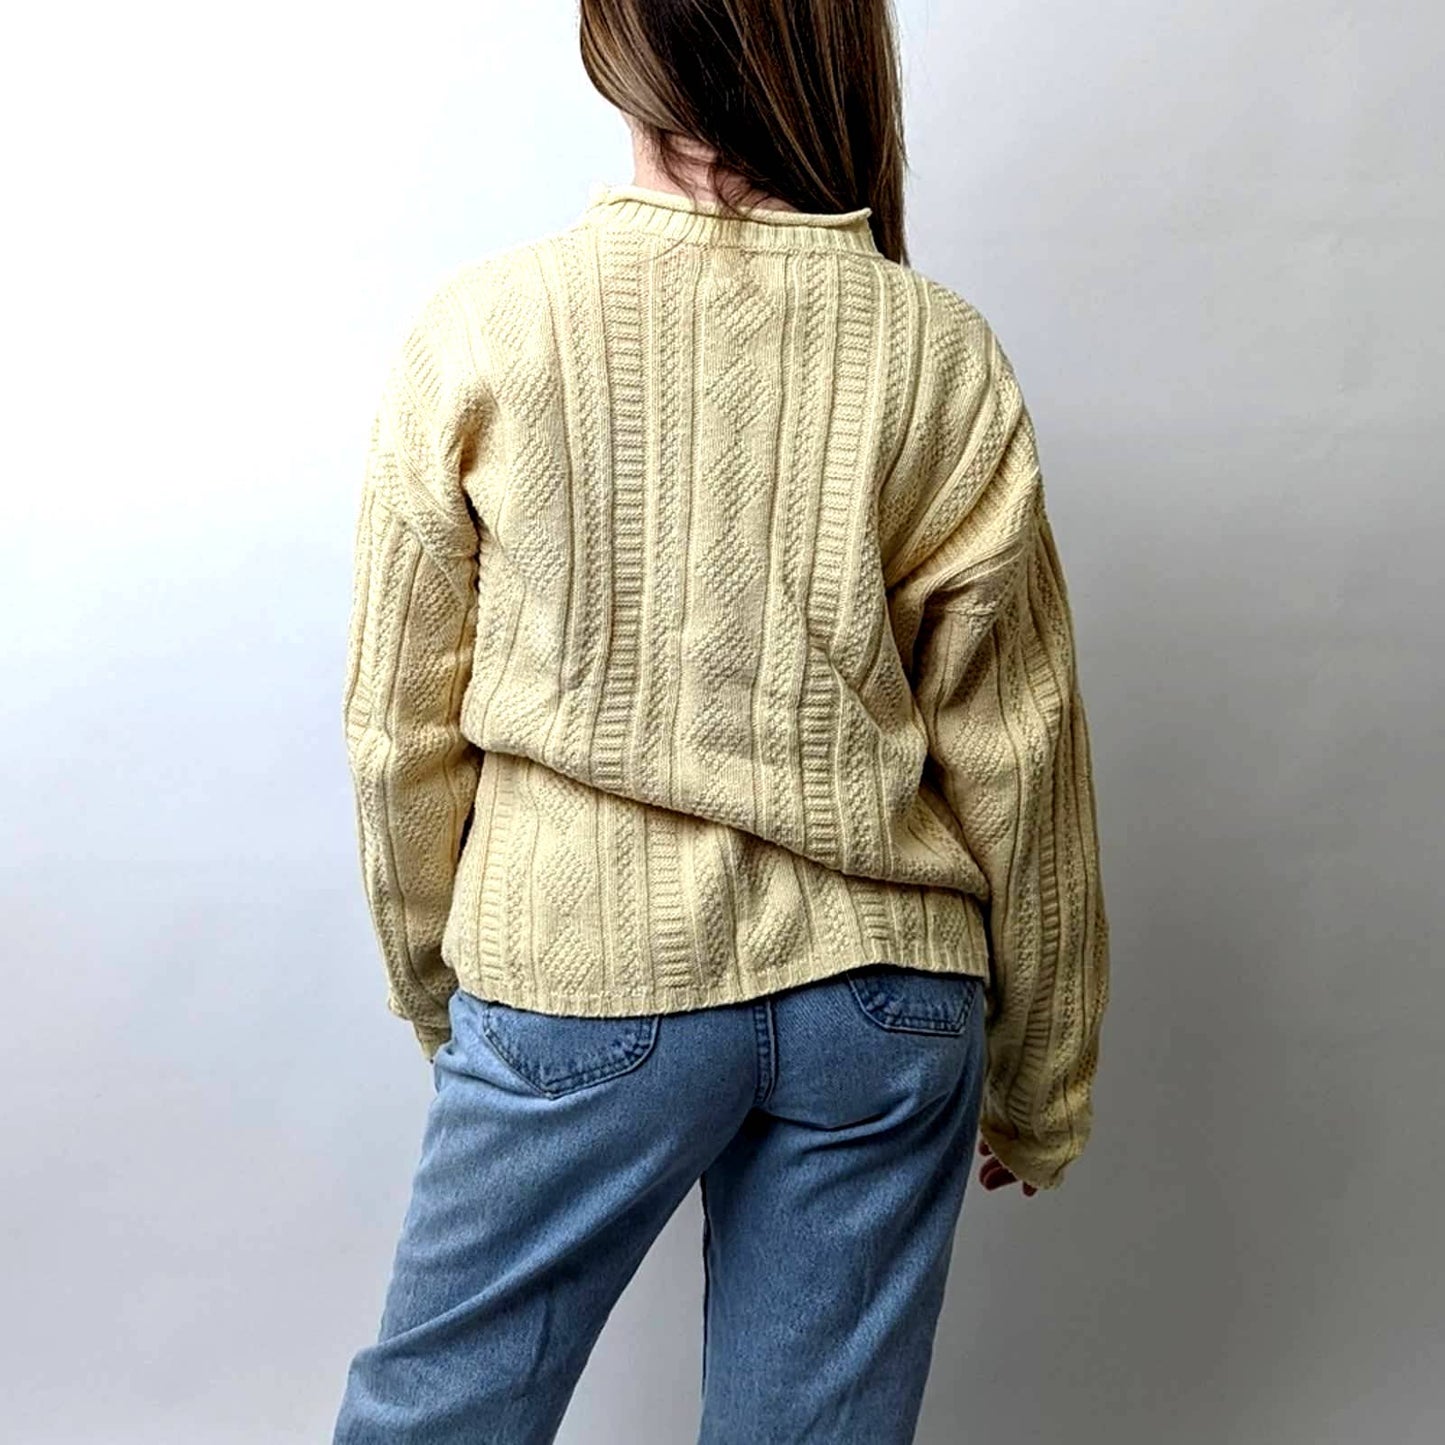 Vintage 90s Cable Knit Chunky Fisherman's Sweater - M